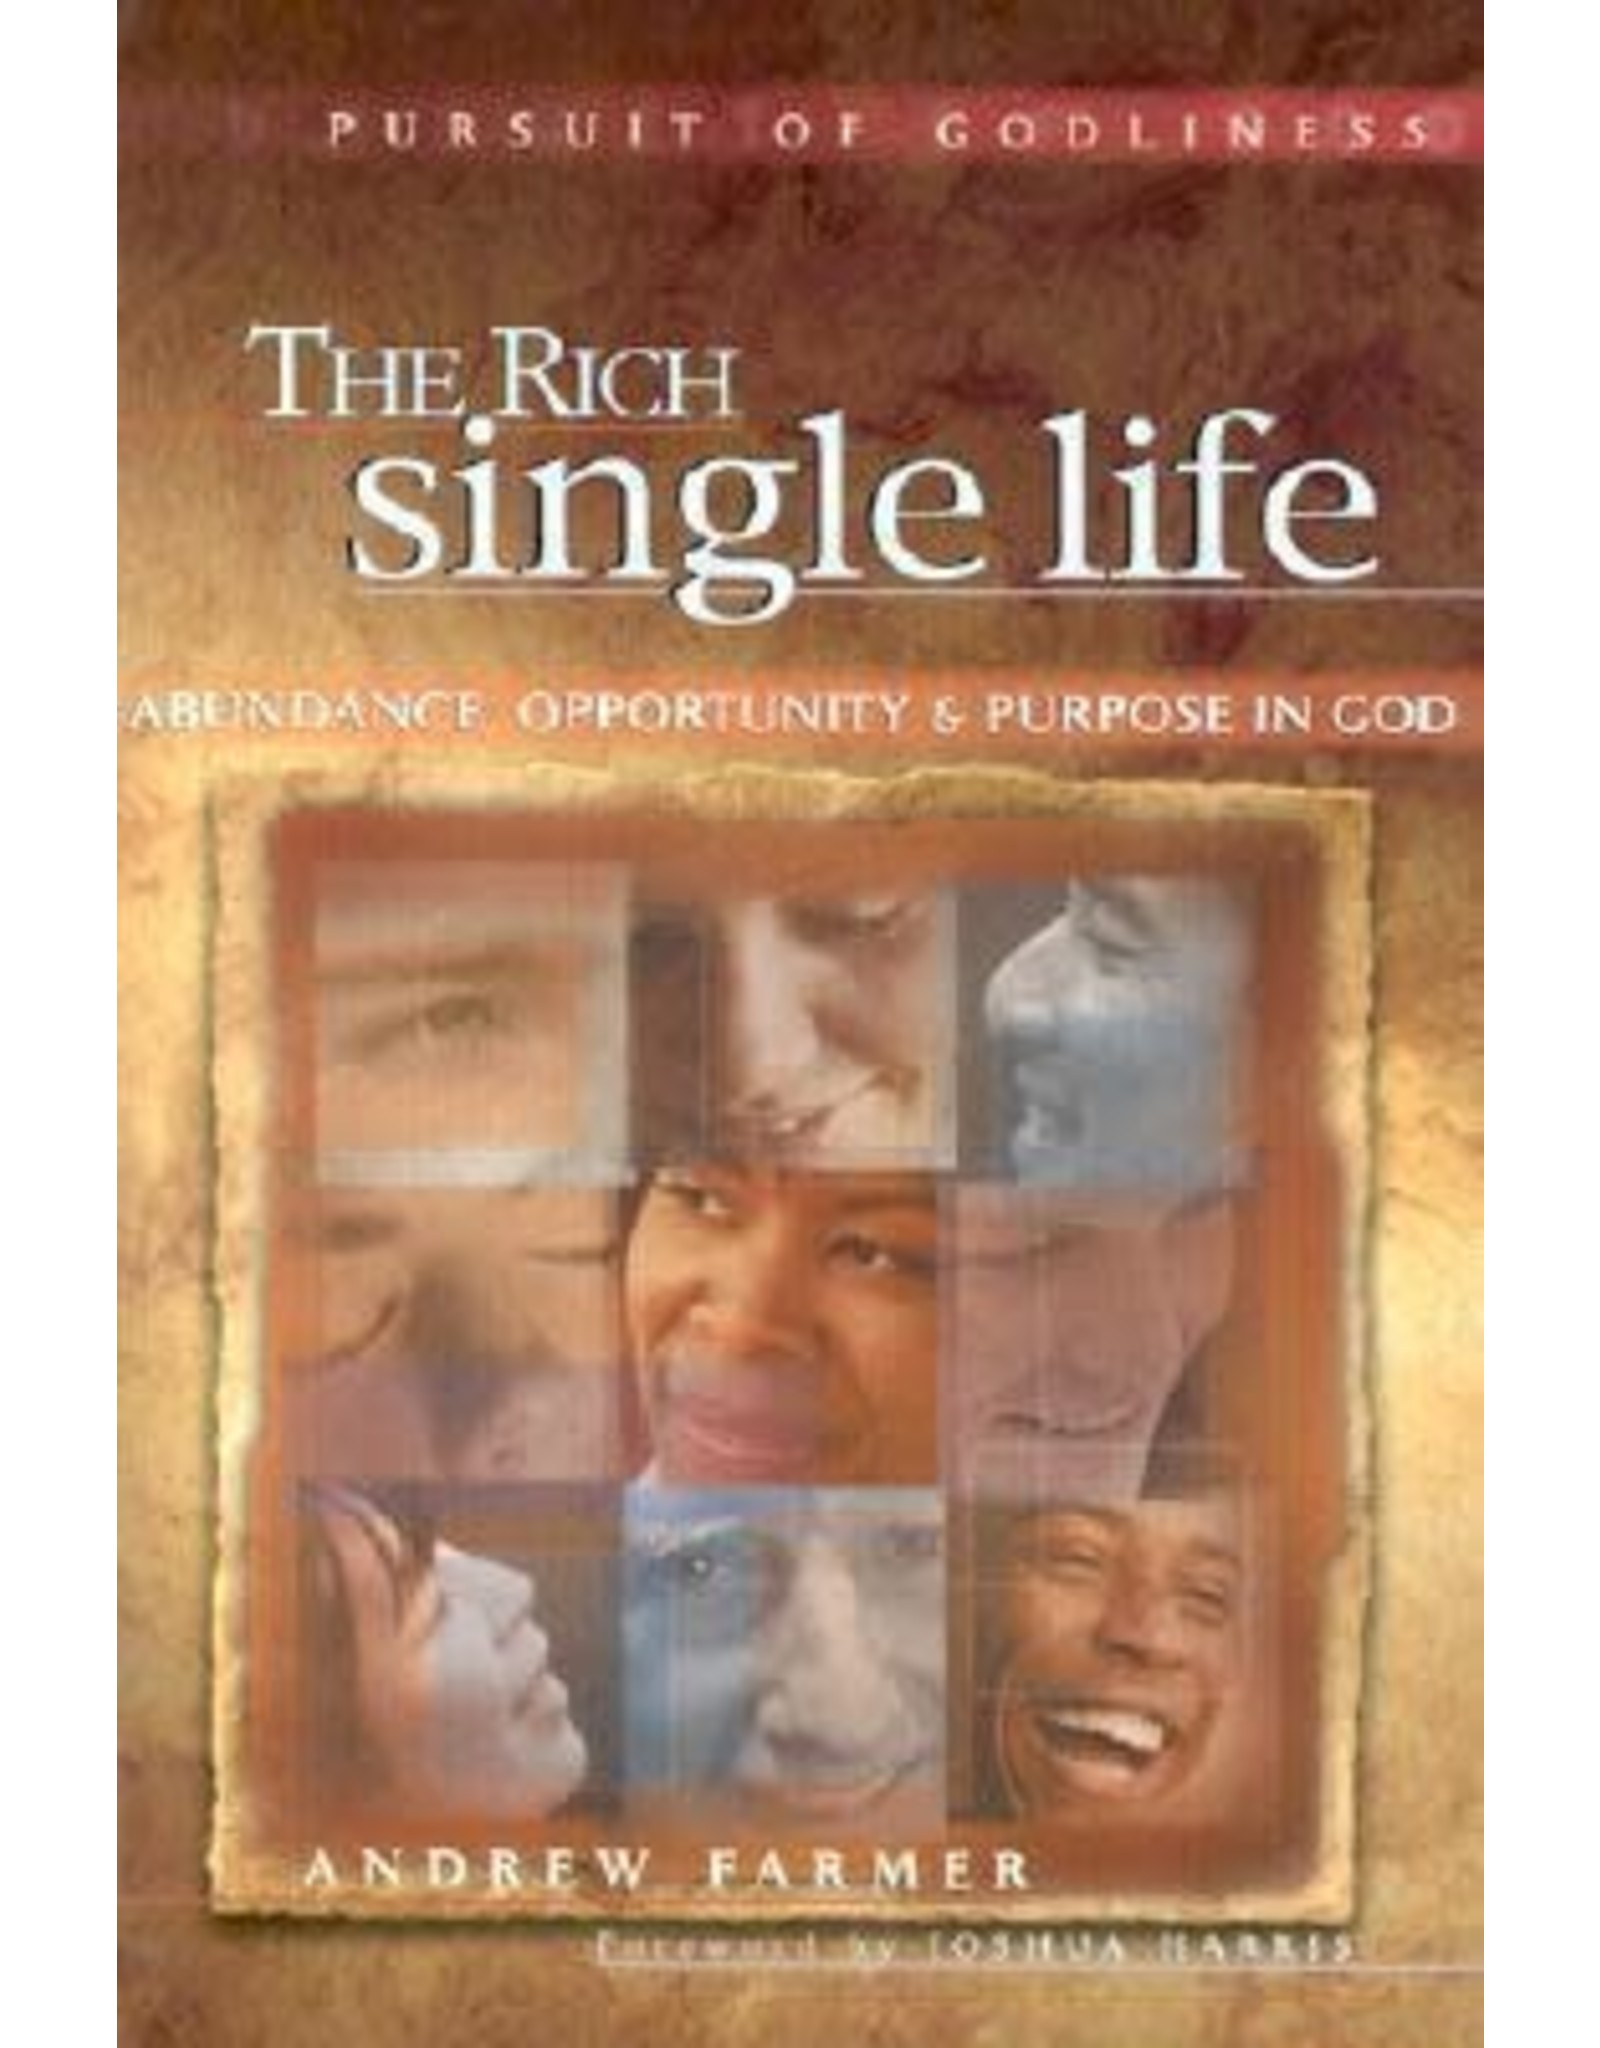 Andrew Farmer The Rich Single Life (The pursuit of Godliness Series)